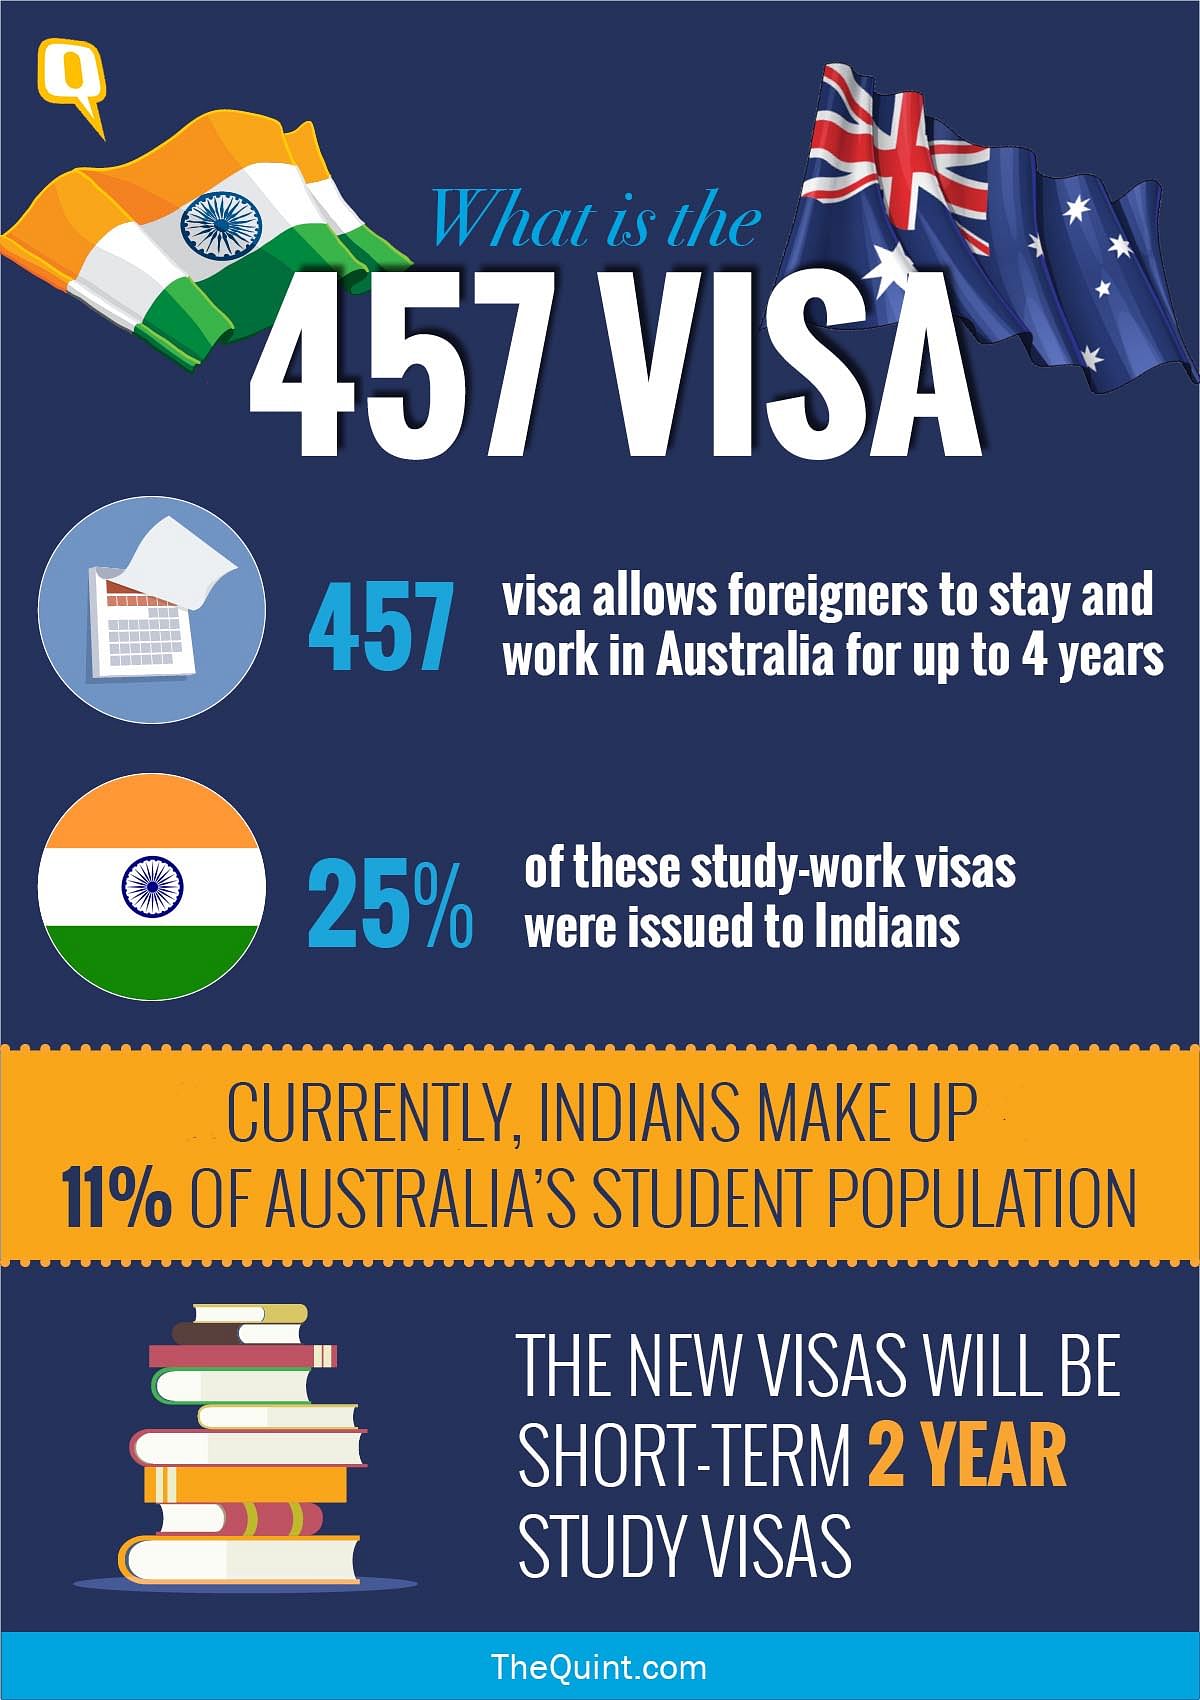 As many as 95,000 foreign nationals work under the 457 visa – 25% of whom are Indians employed in the country.